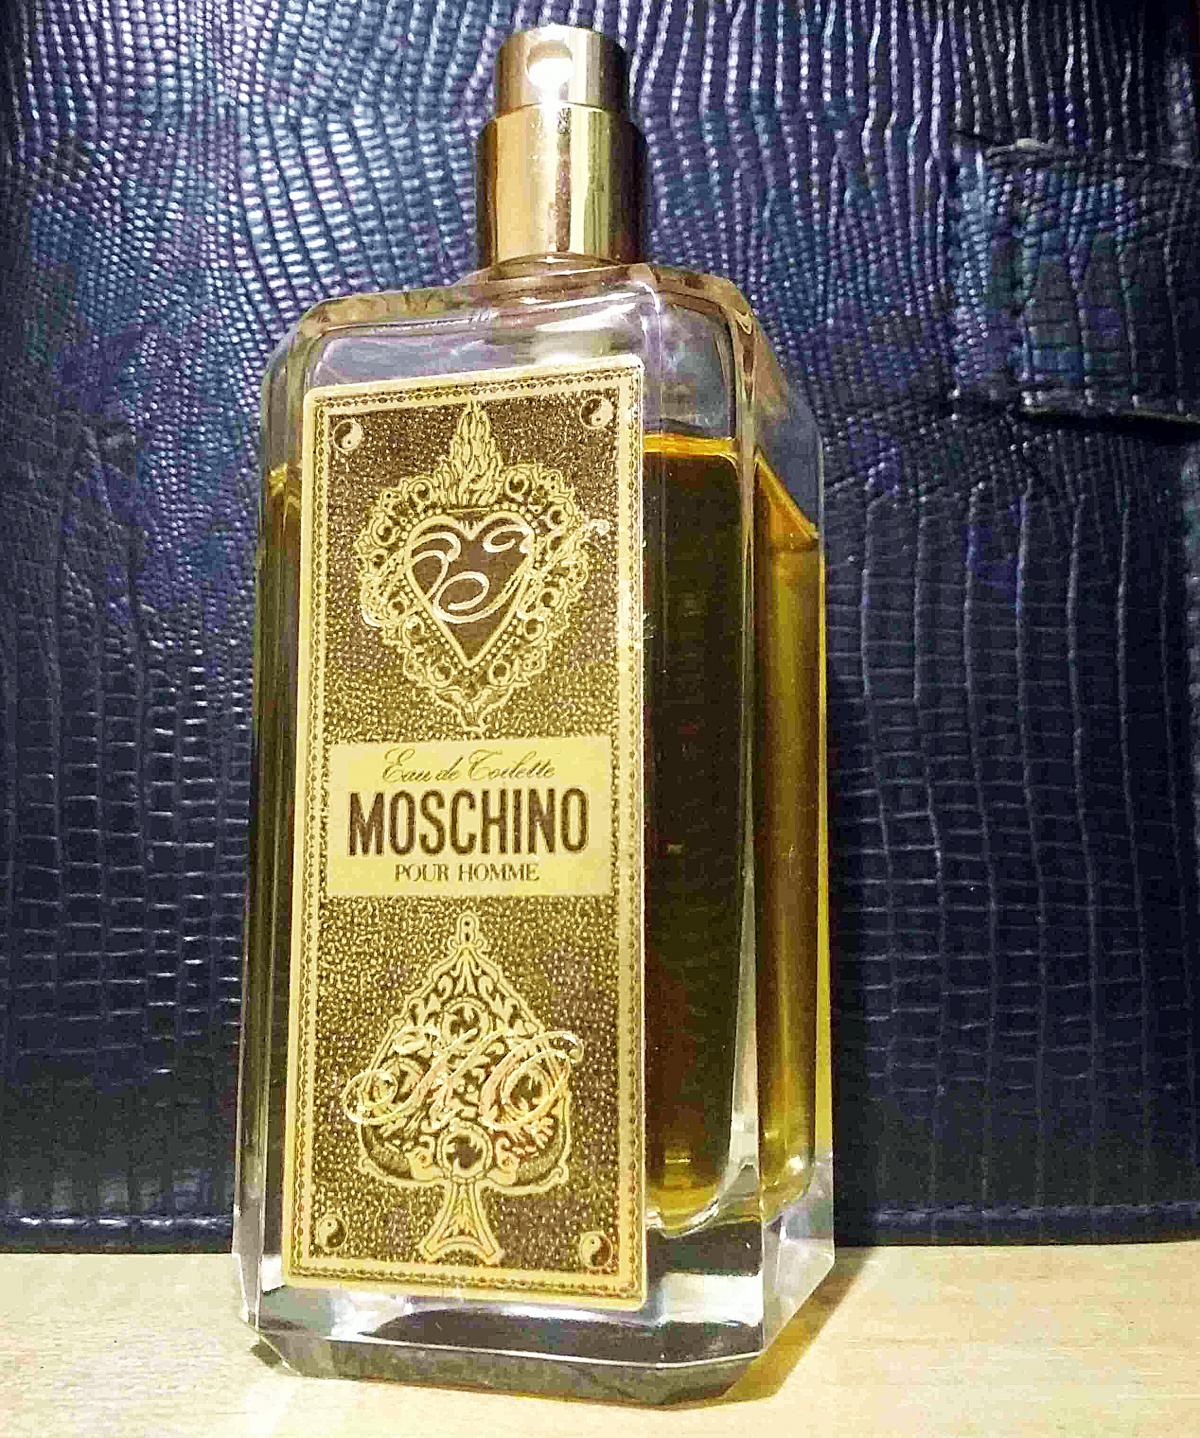 Moschino Pour Homme Moschino cologne - a fragrance for men 1990